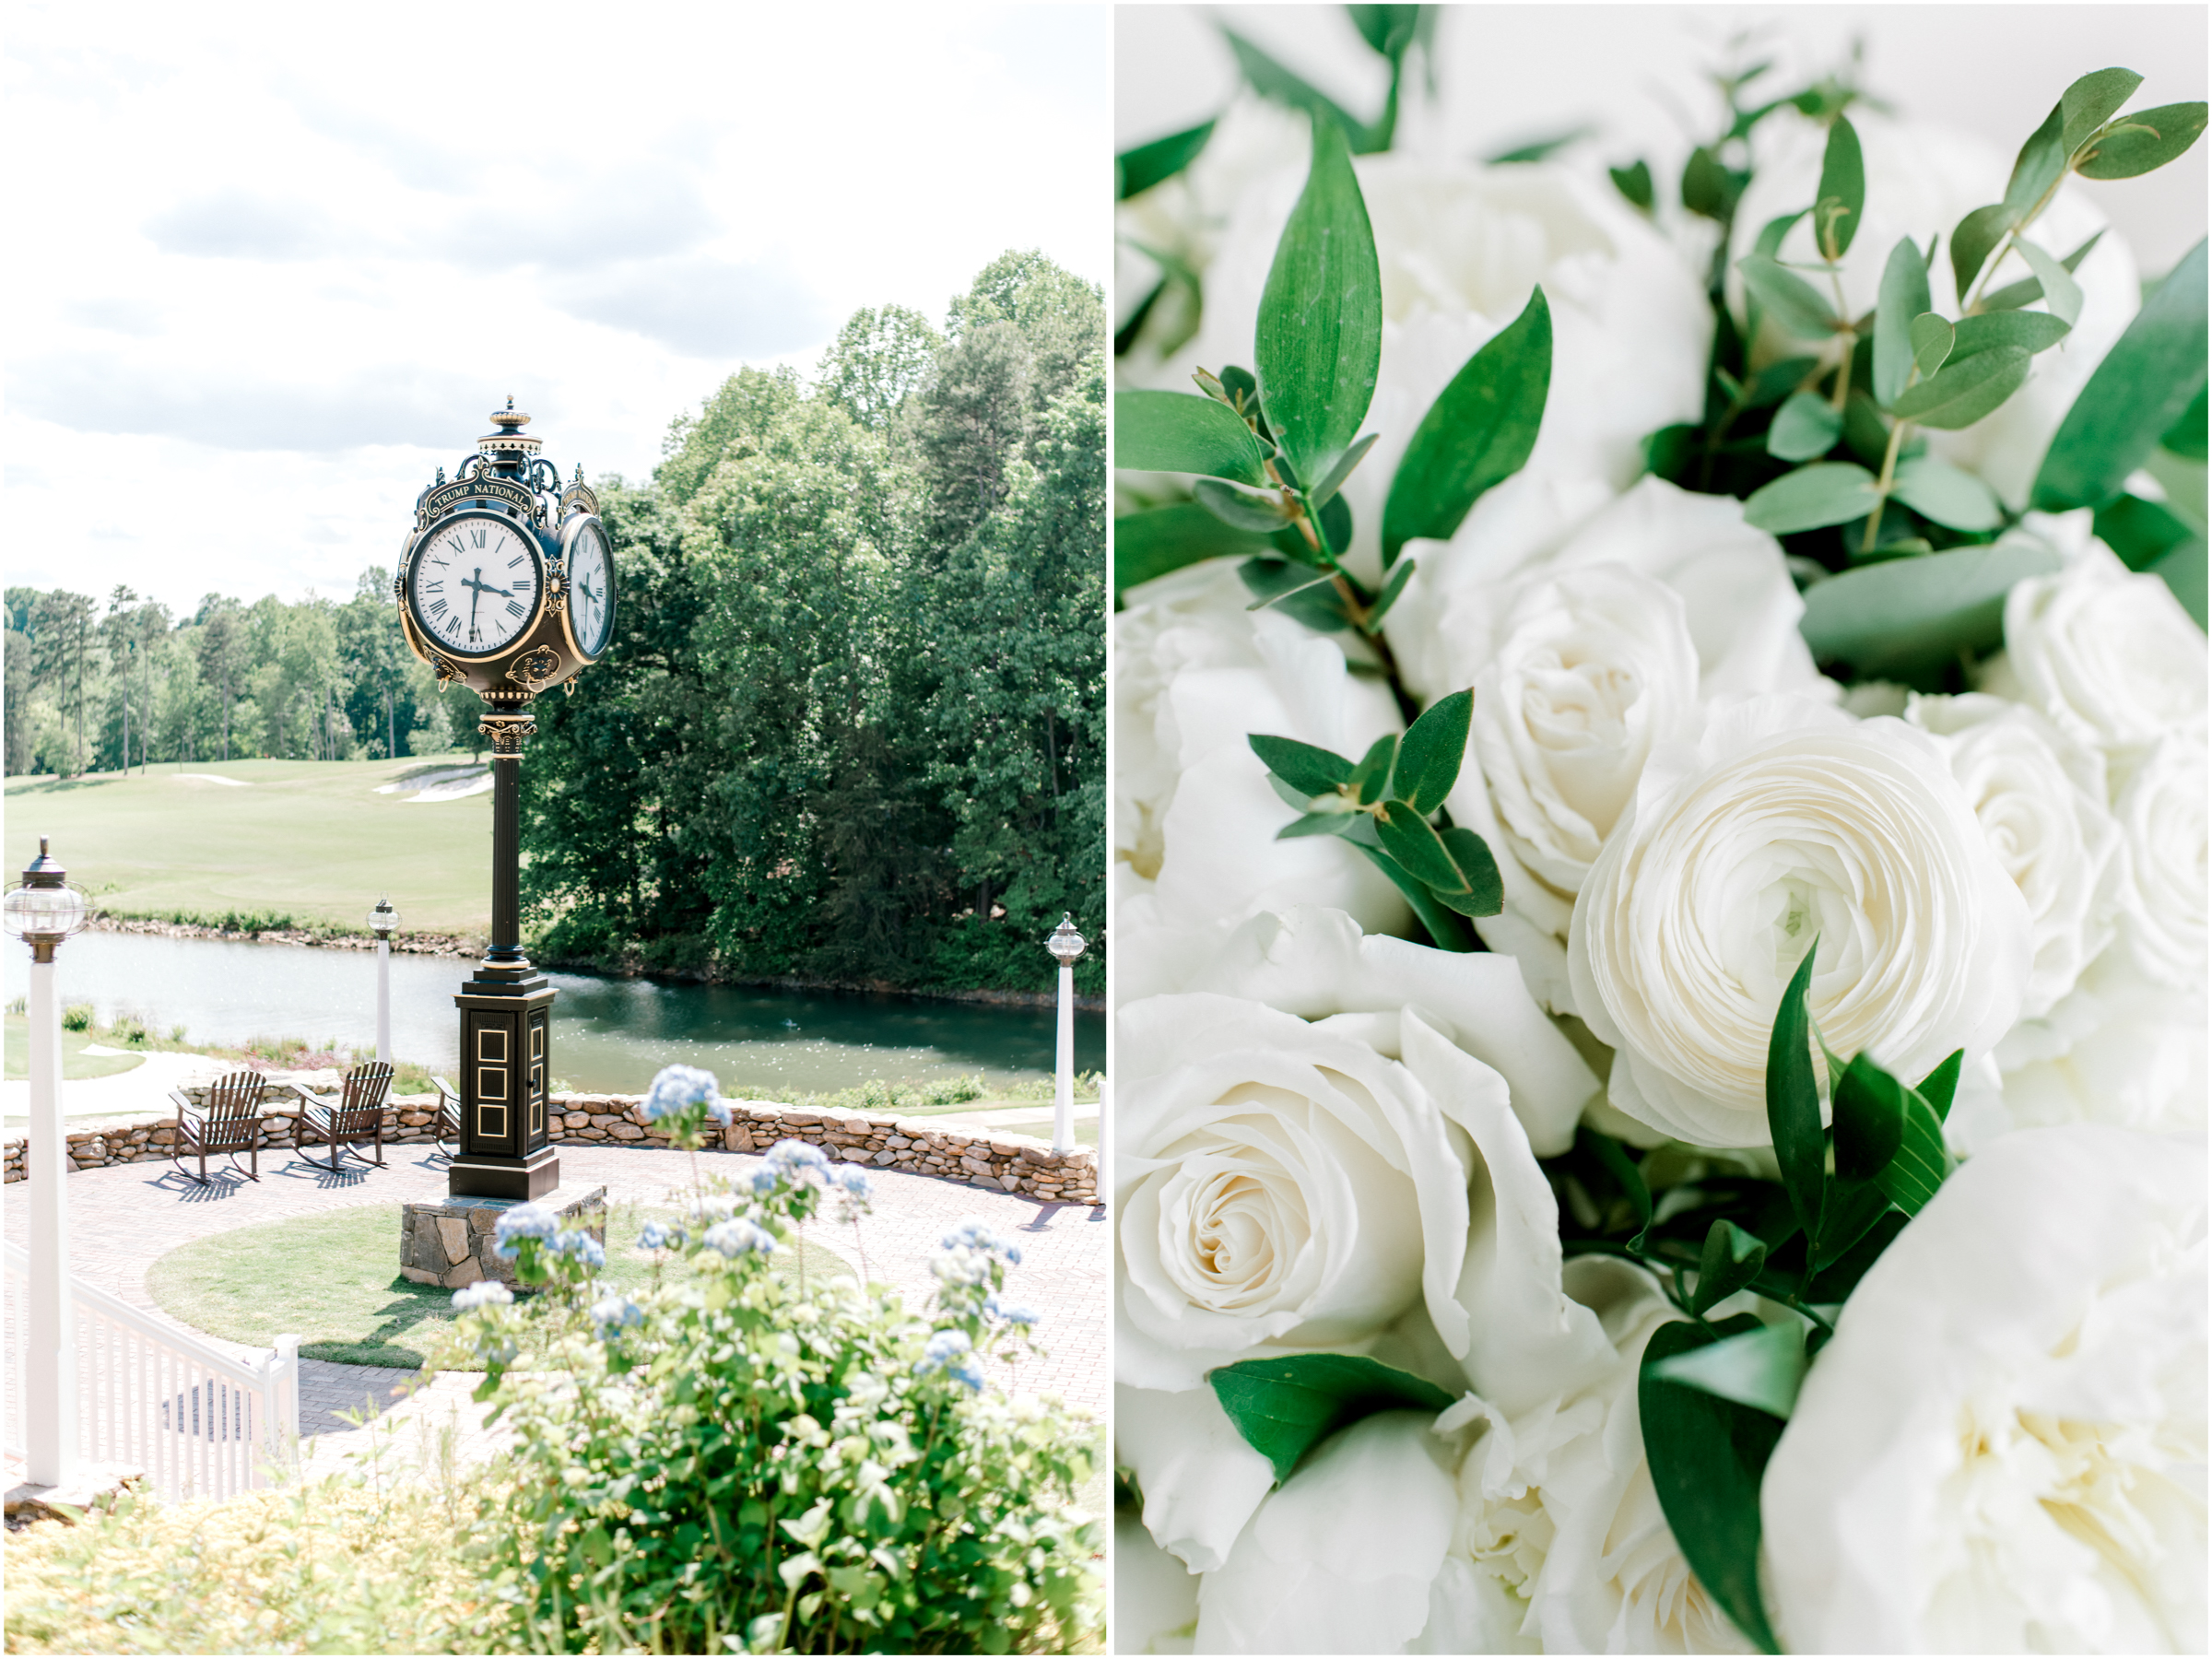 bell tower clock and roses